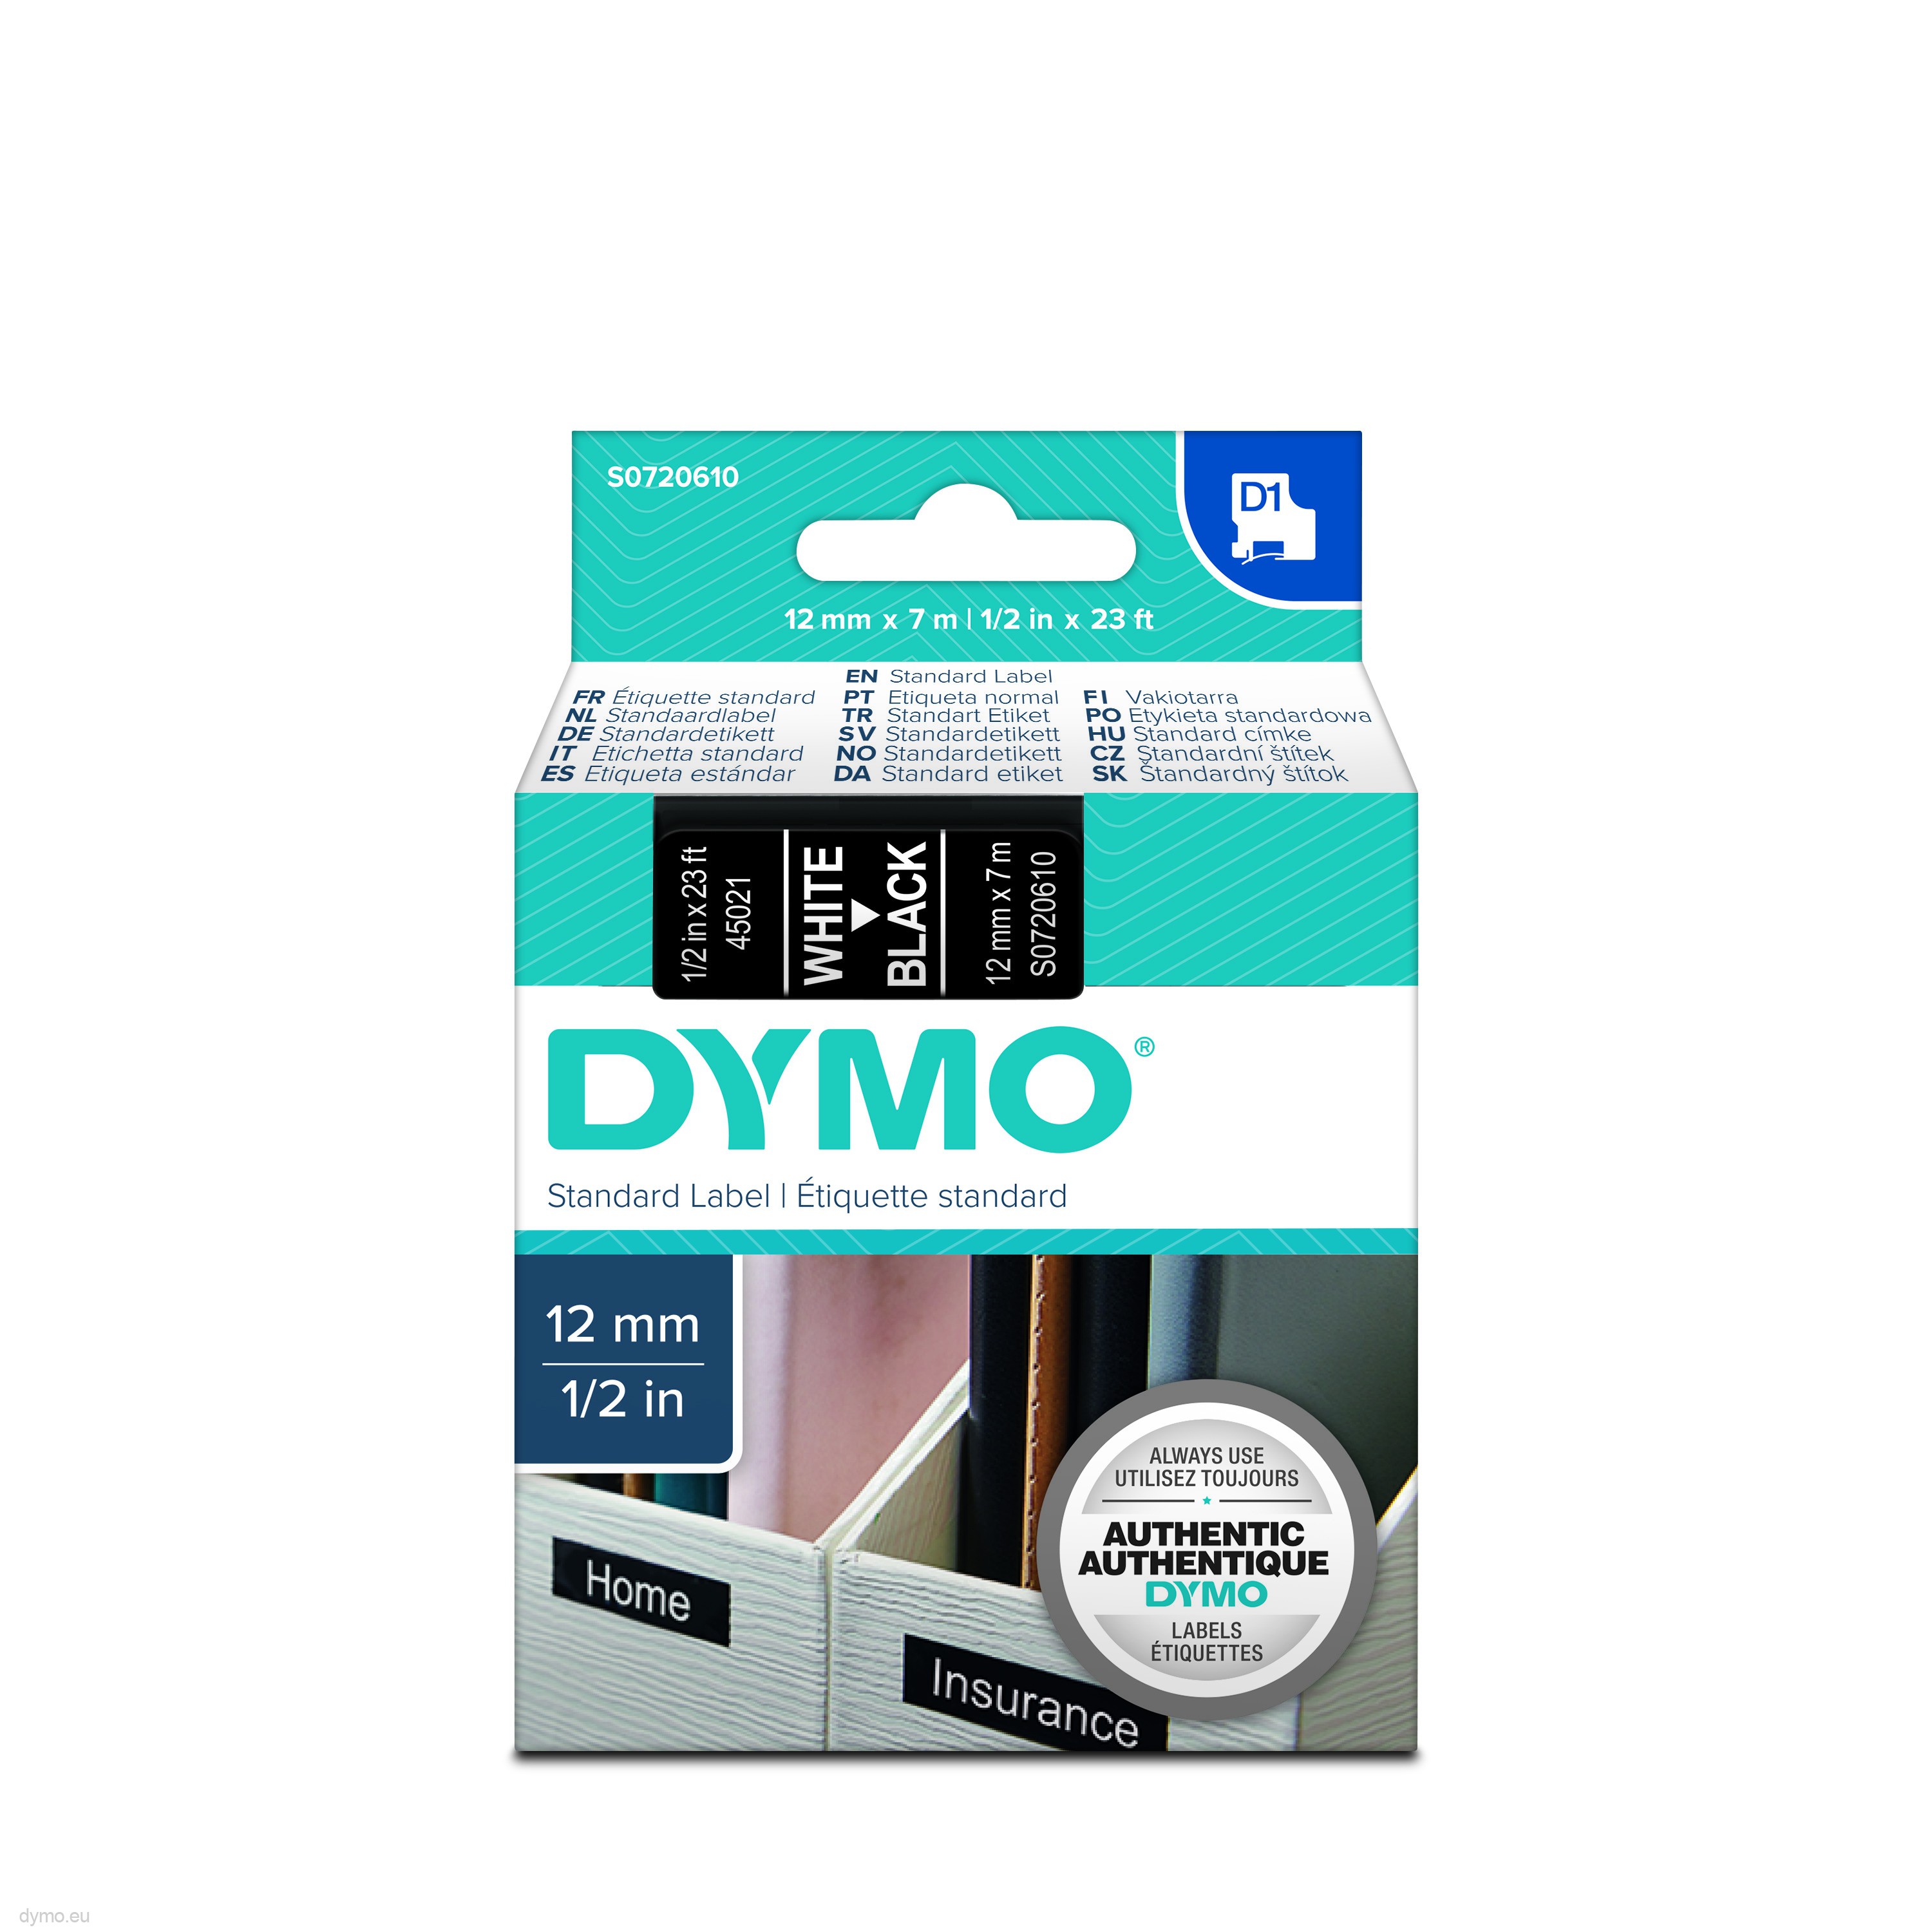 DYMO D1 45800 19mm X 7m COMPATIBLE TAPE BLACK/CLEAR 3/4” x 23’ 5 PACK 4/17/21 